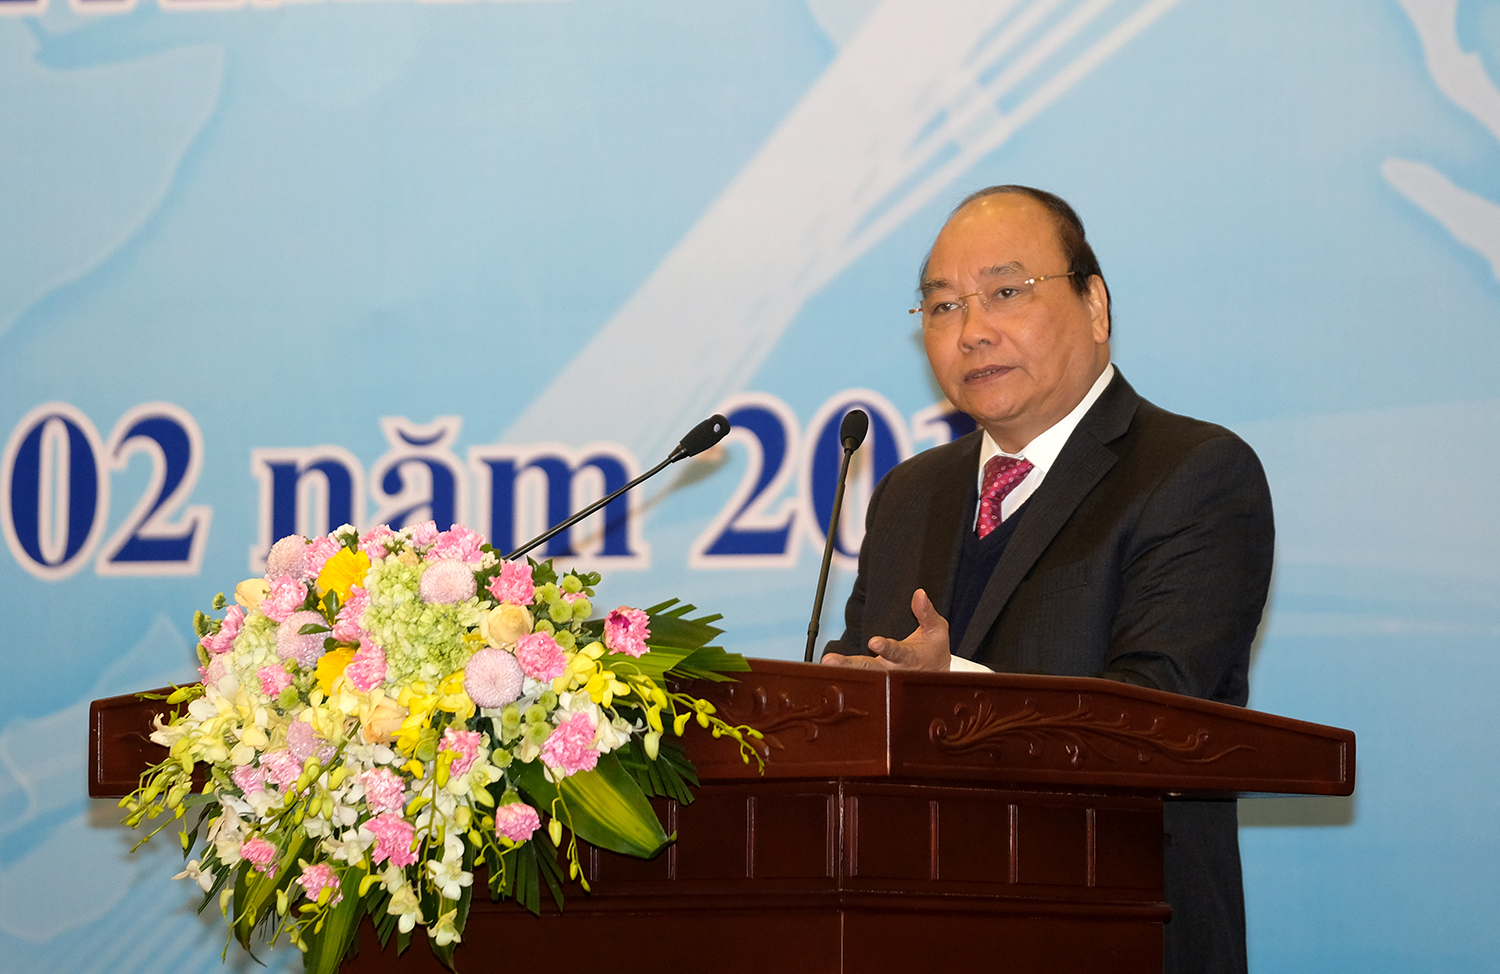 Vietnam's Prime Minister Nguyen Xuan Phuc delivers remarks at a conference in Hanoi on February 7, 2018. Photo: VGP